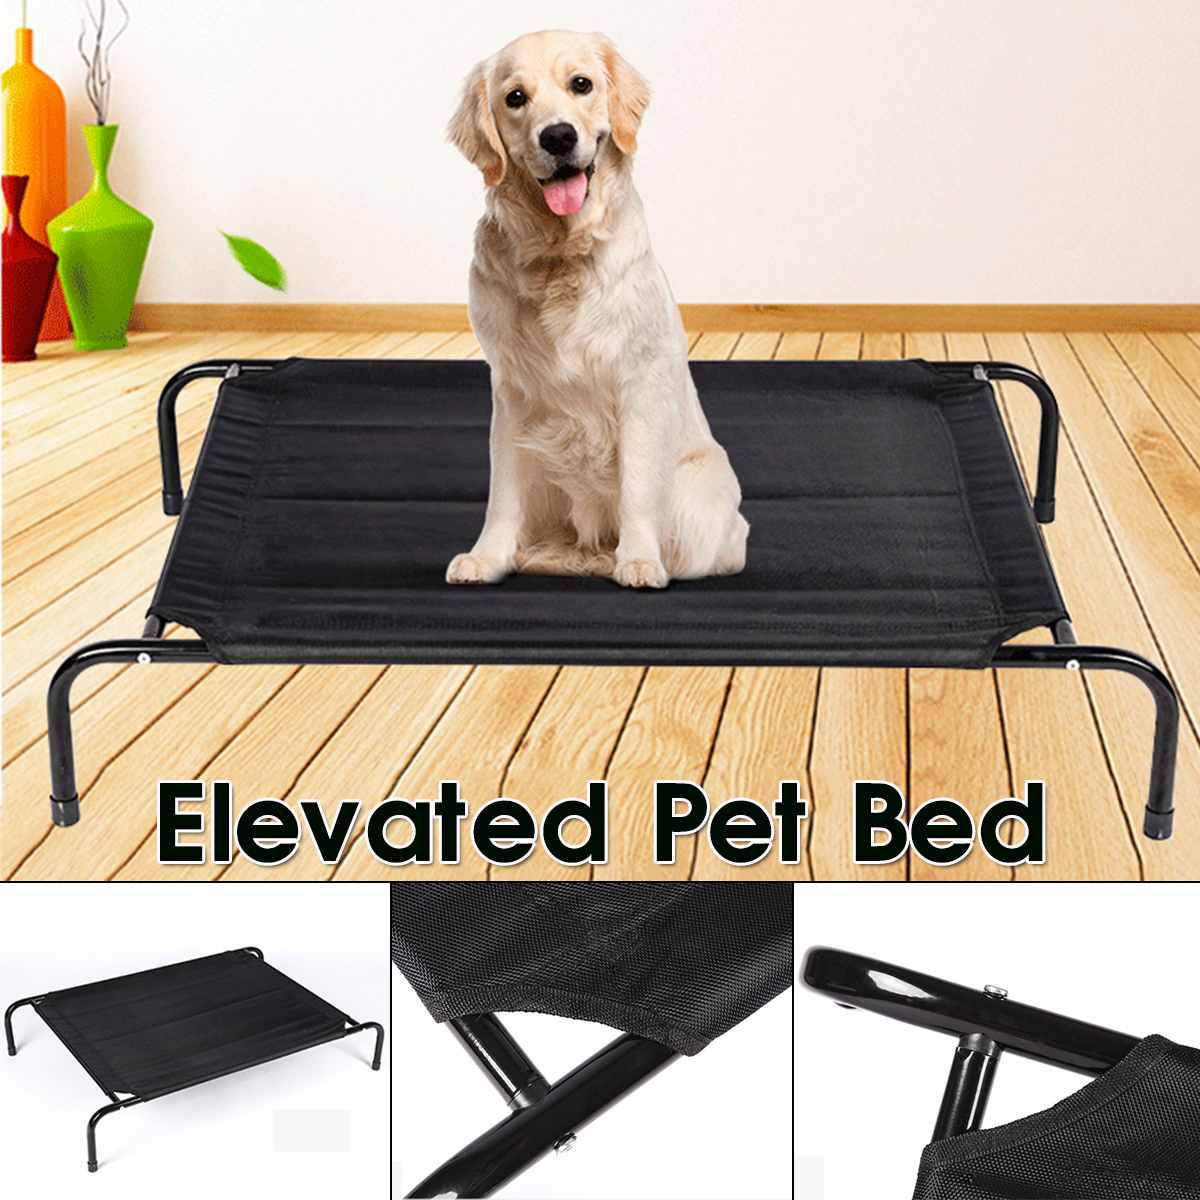 Elevated Pet Bed Detachable Summer Dog Cooling Bed Outdoor Breathable Mesh Raised Cat Puppy Bed Mat Dog Cot Sleep Camping Bed